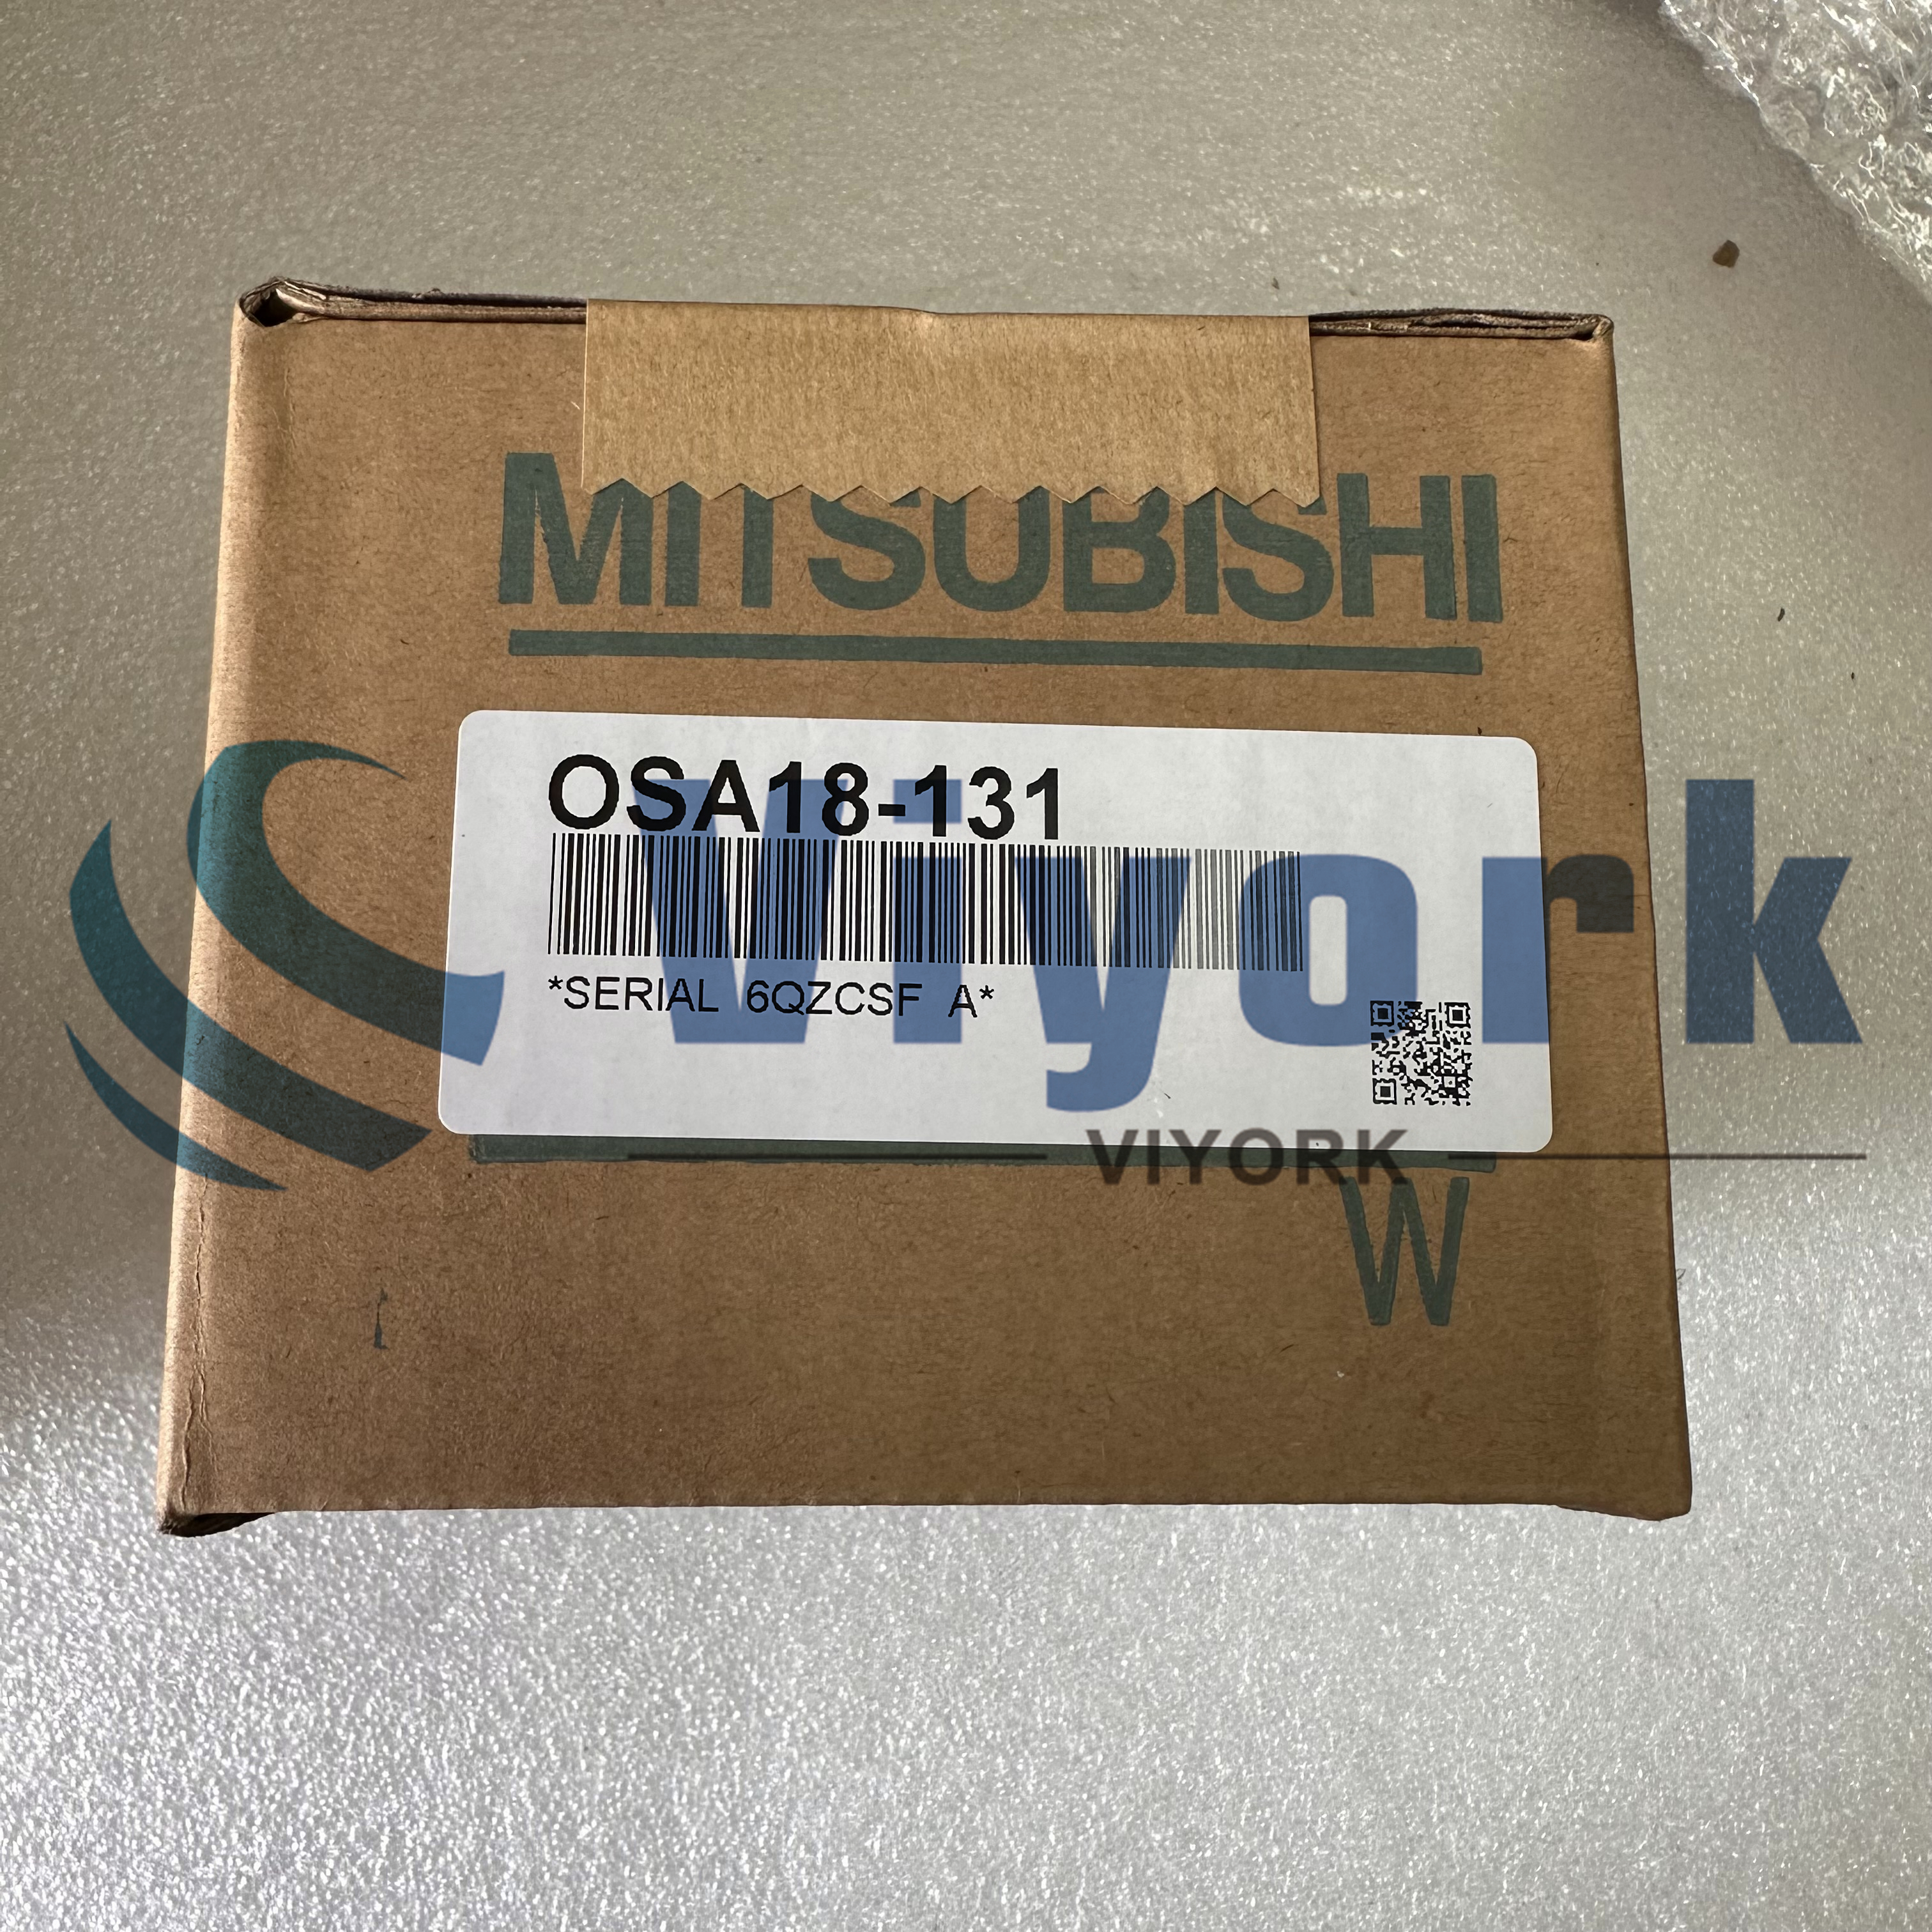 Mitsubishi OSA18-131 ABSOLUTE ENCODER FOR SERVO DEVICES NEW